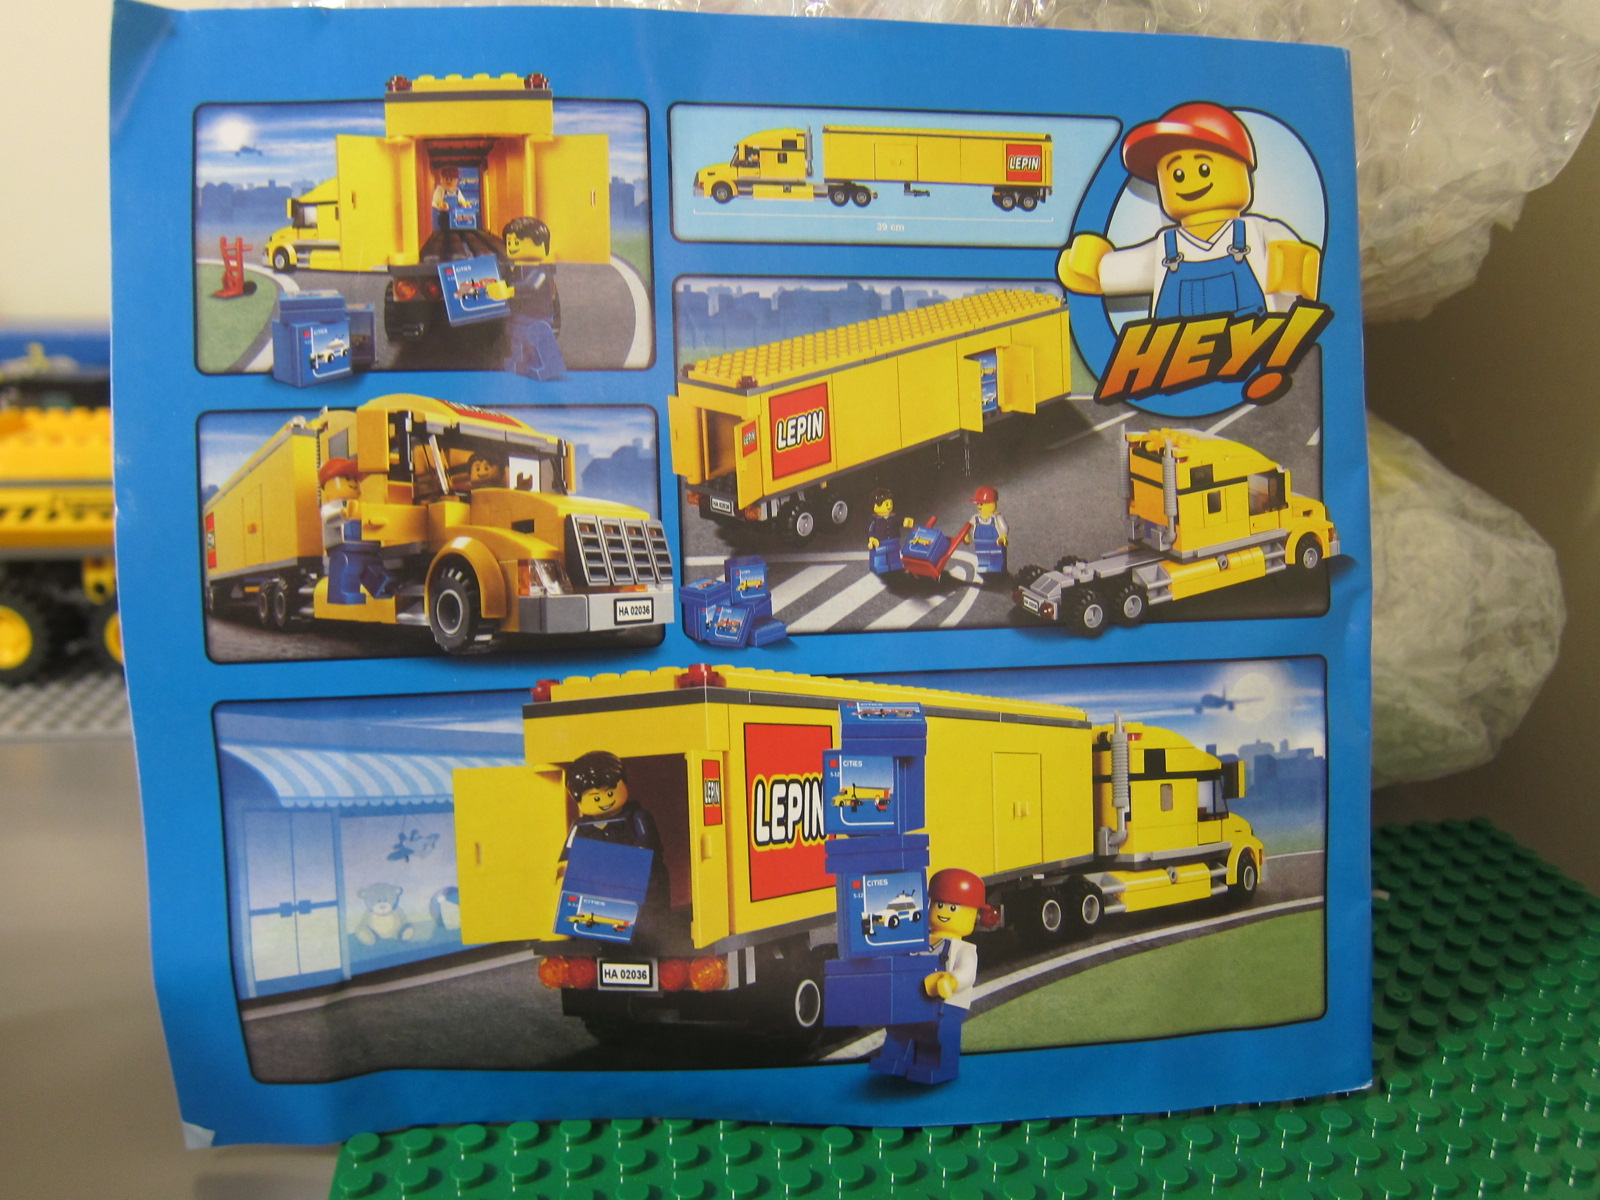 It's Lego: Lepin 02036 Not City Truck Review